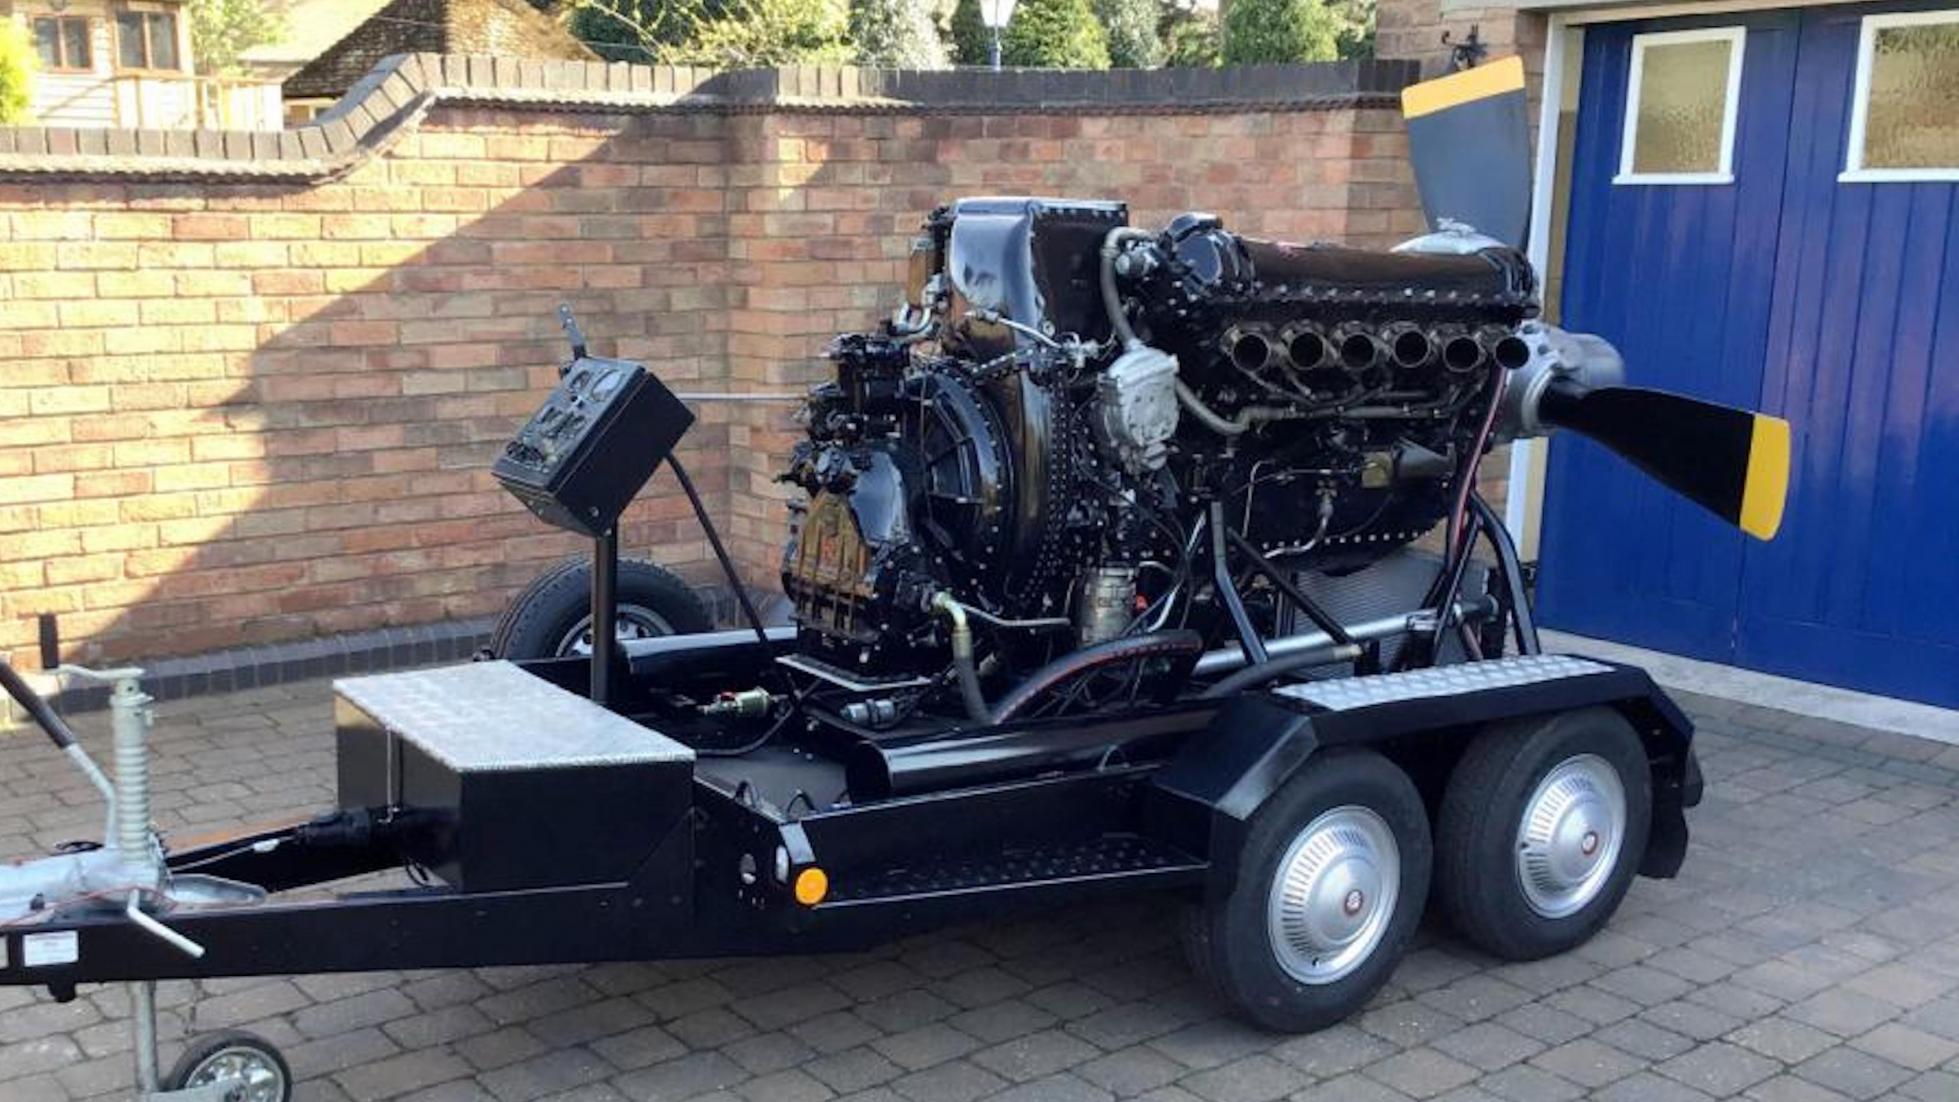 What car would you put this 1,760bhp Spitfire engine into?